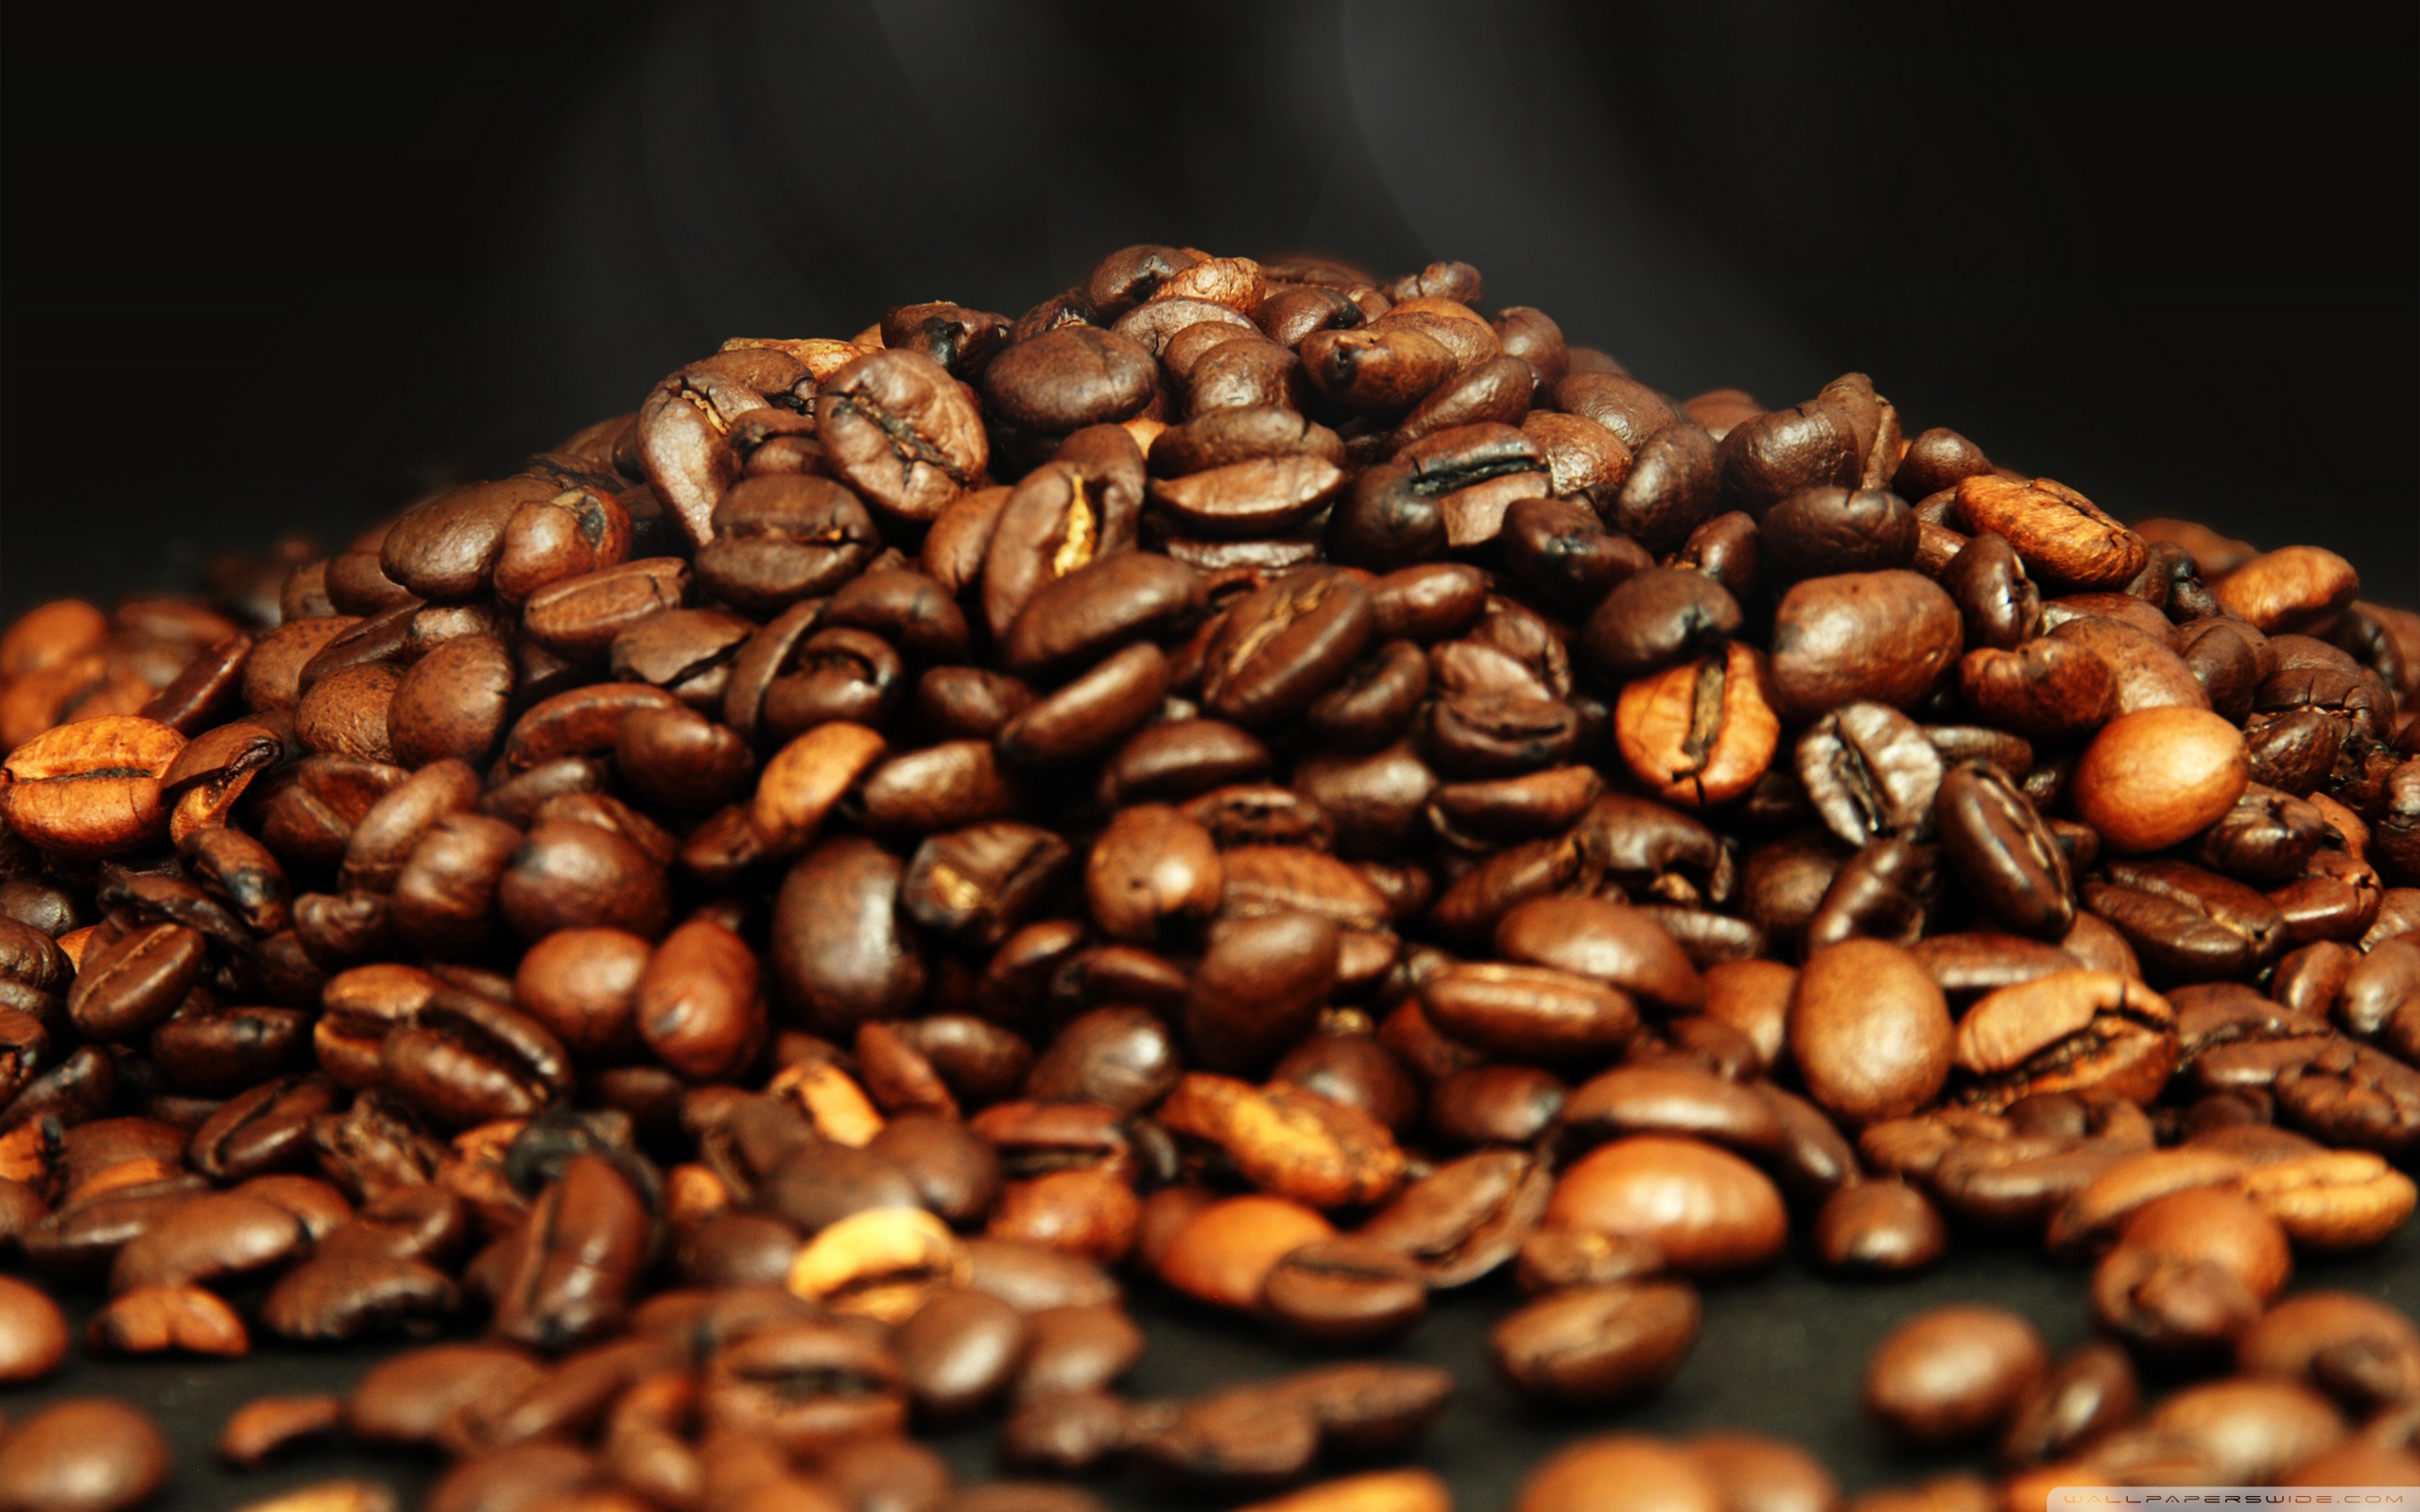 Coffee Beans Wallpaper HQ Free Wallpapers download high